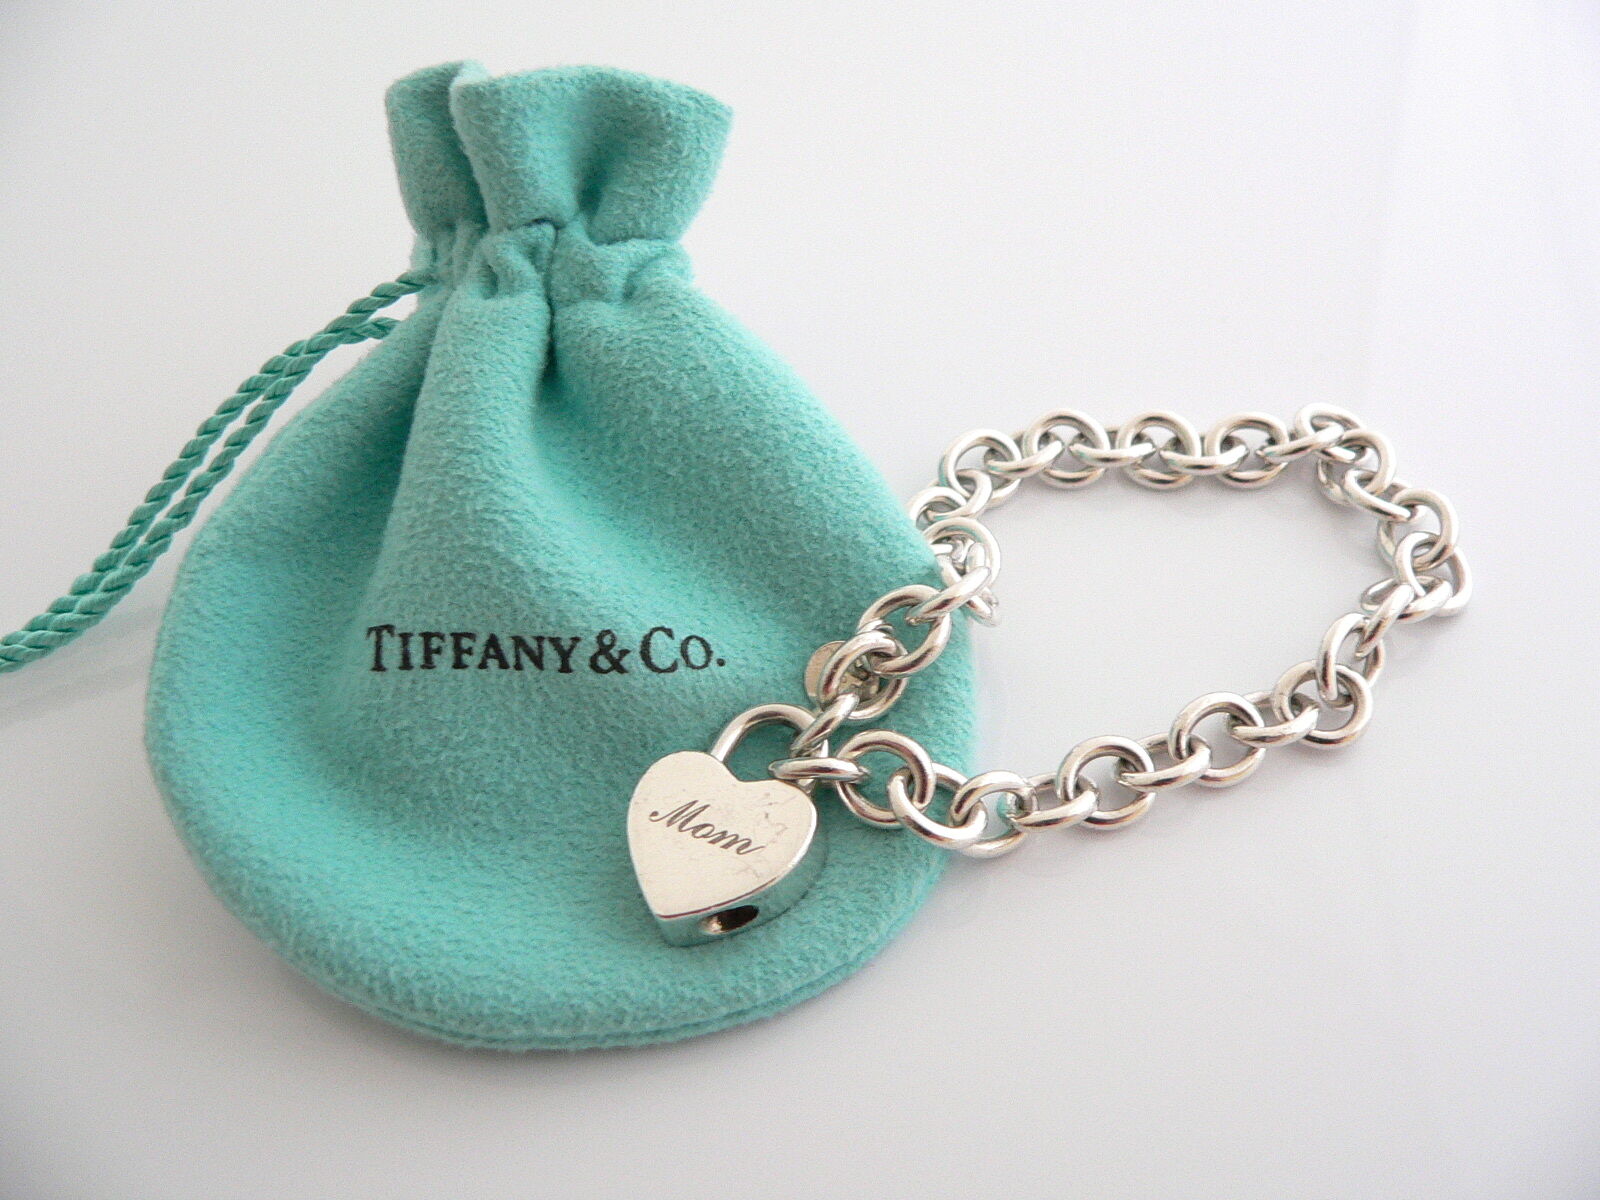 Tiffany & Co.Return to Heart Lock Pendant Necklace Sterling Silver 925  W/Pouch